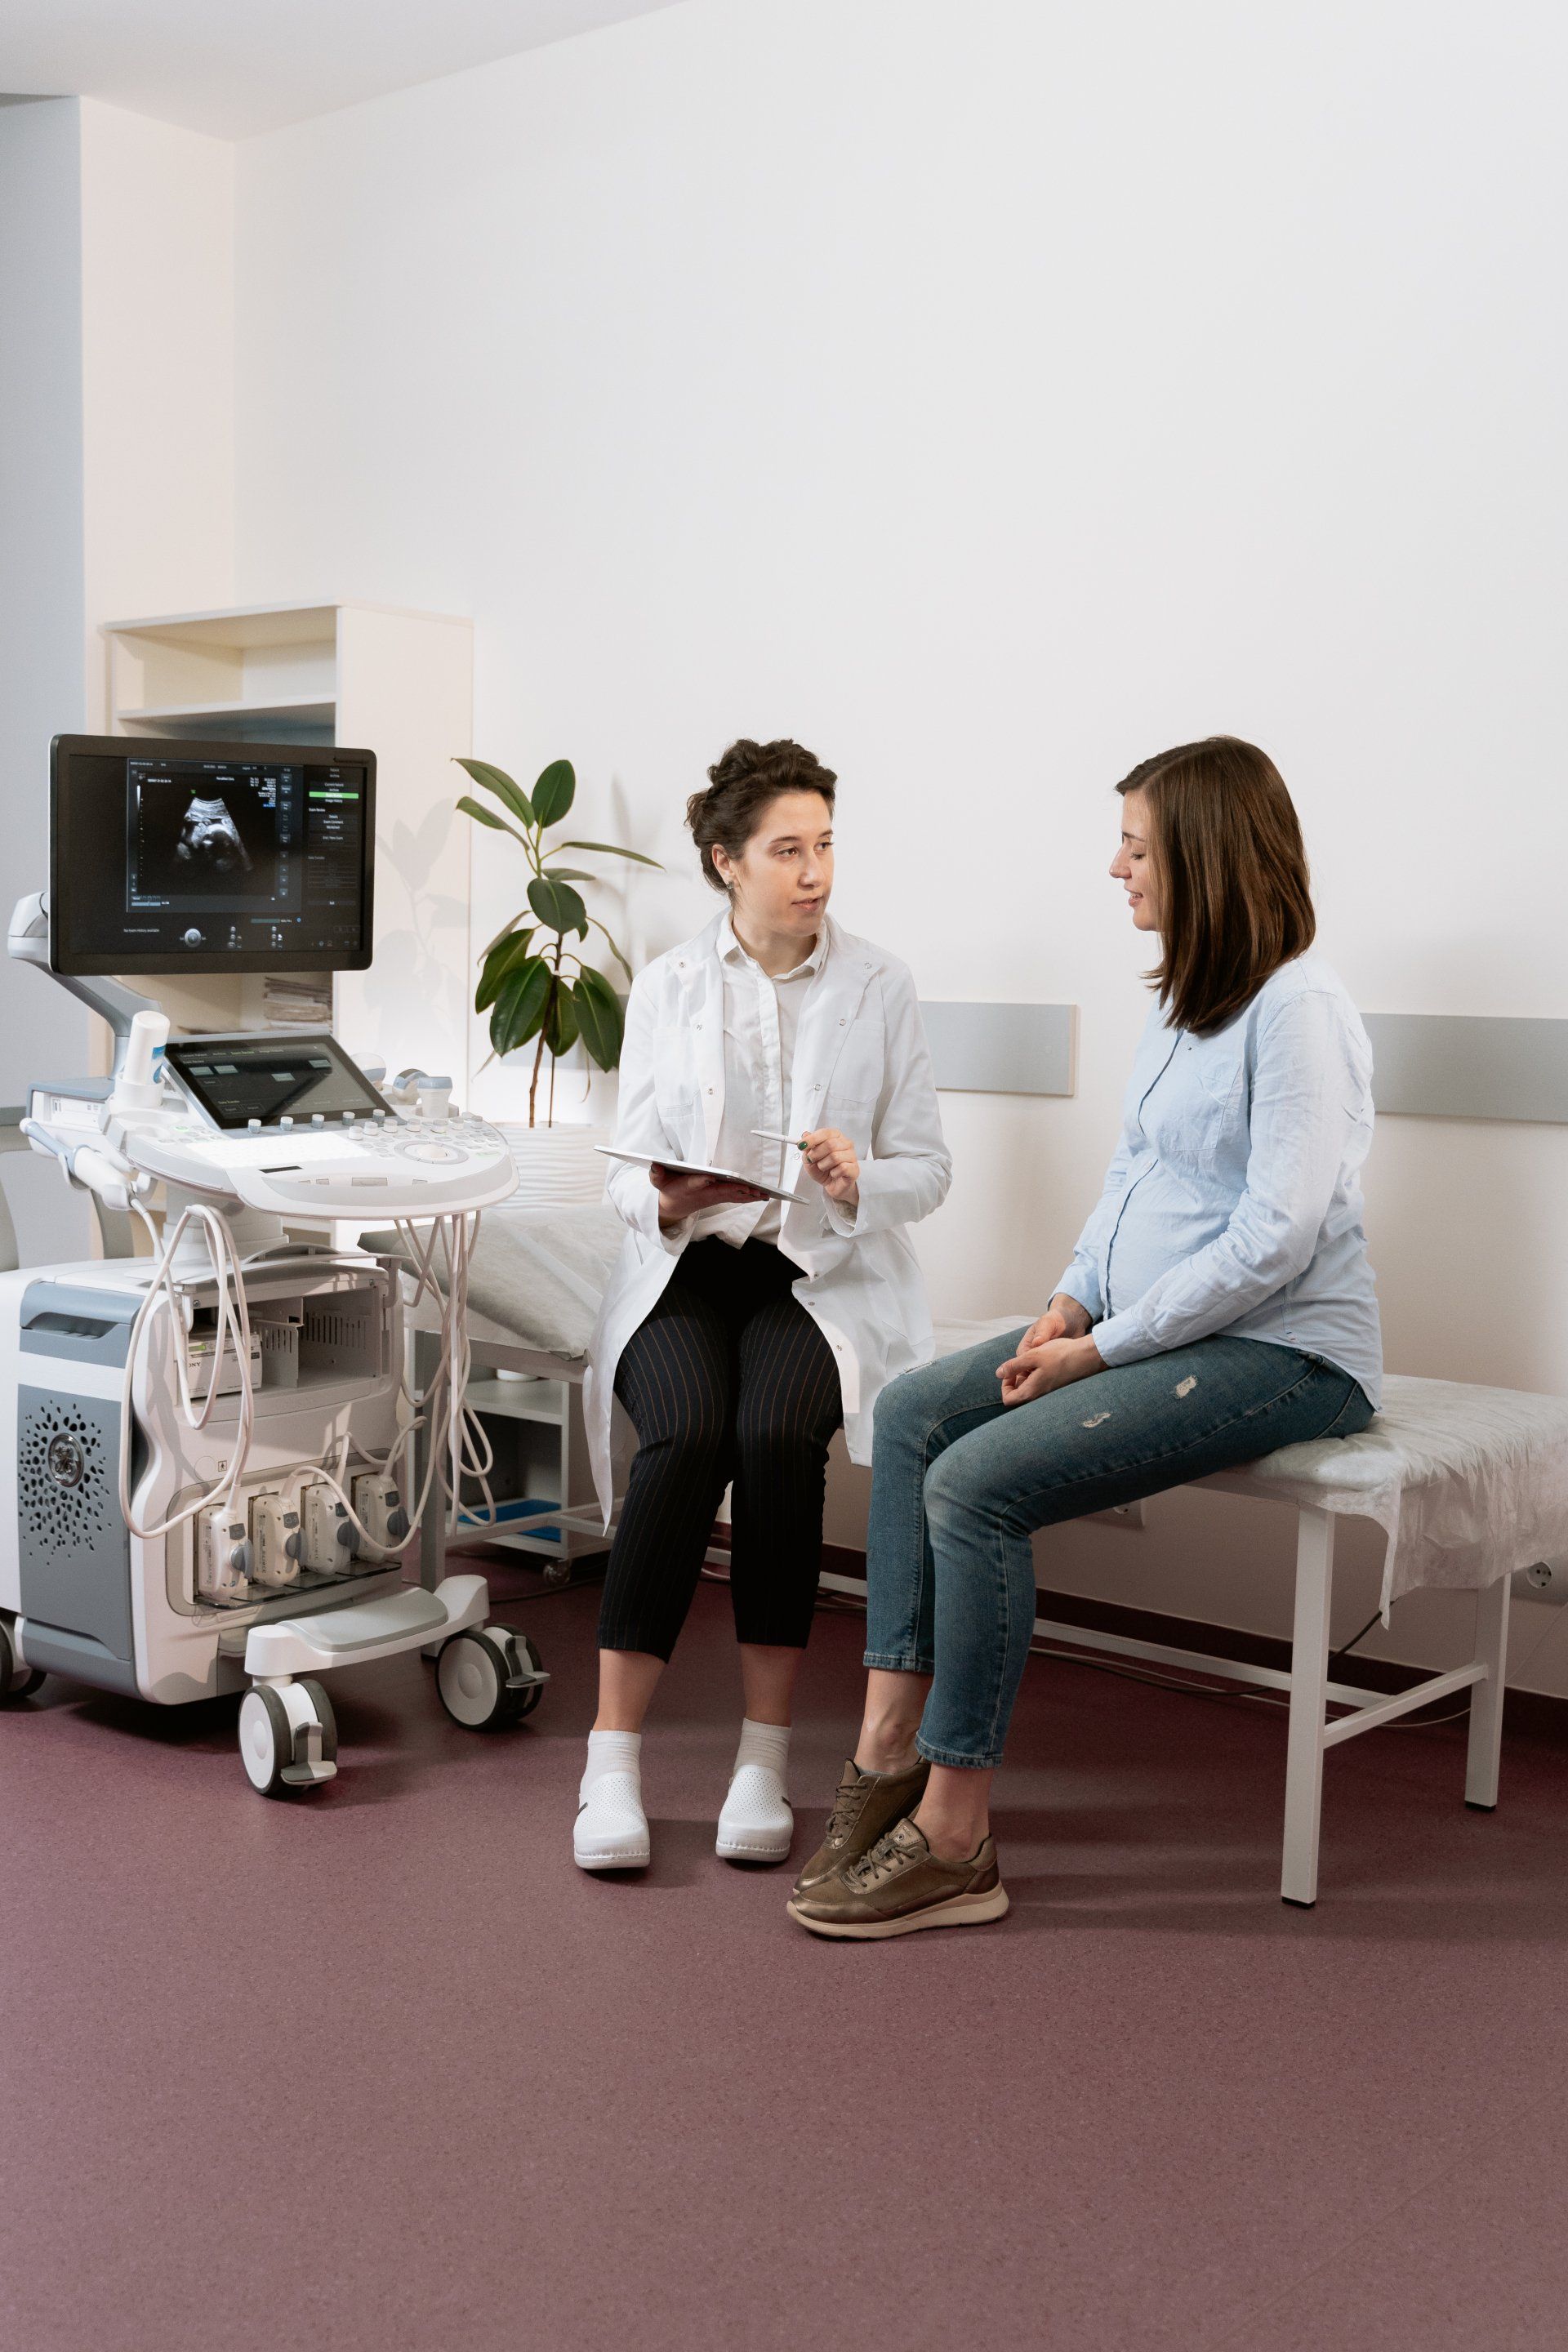 A pregnant woman is sitting on a bench talking to a doctor. Consulting in a doctors office